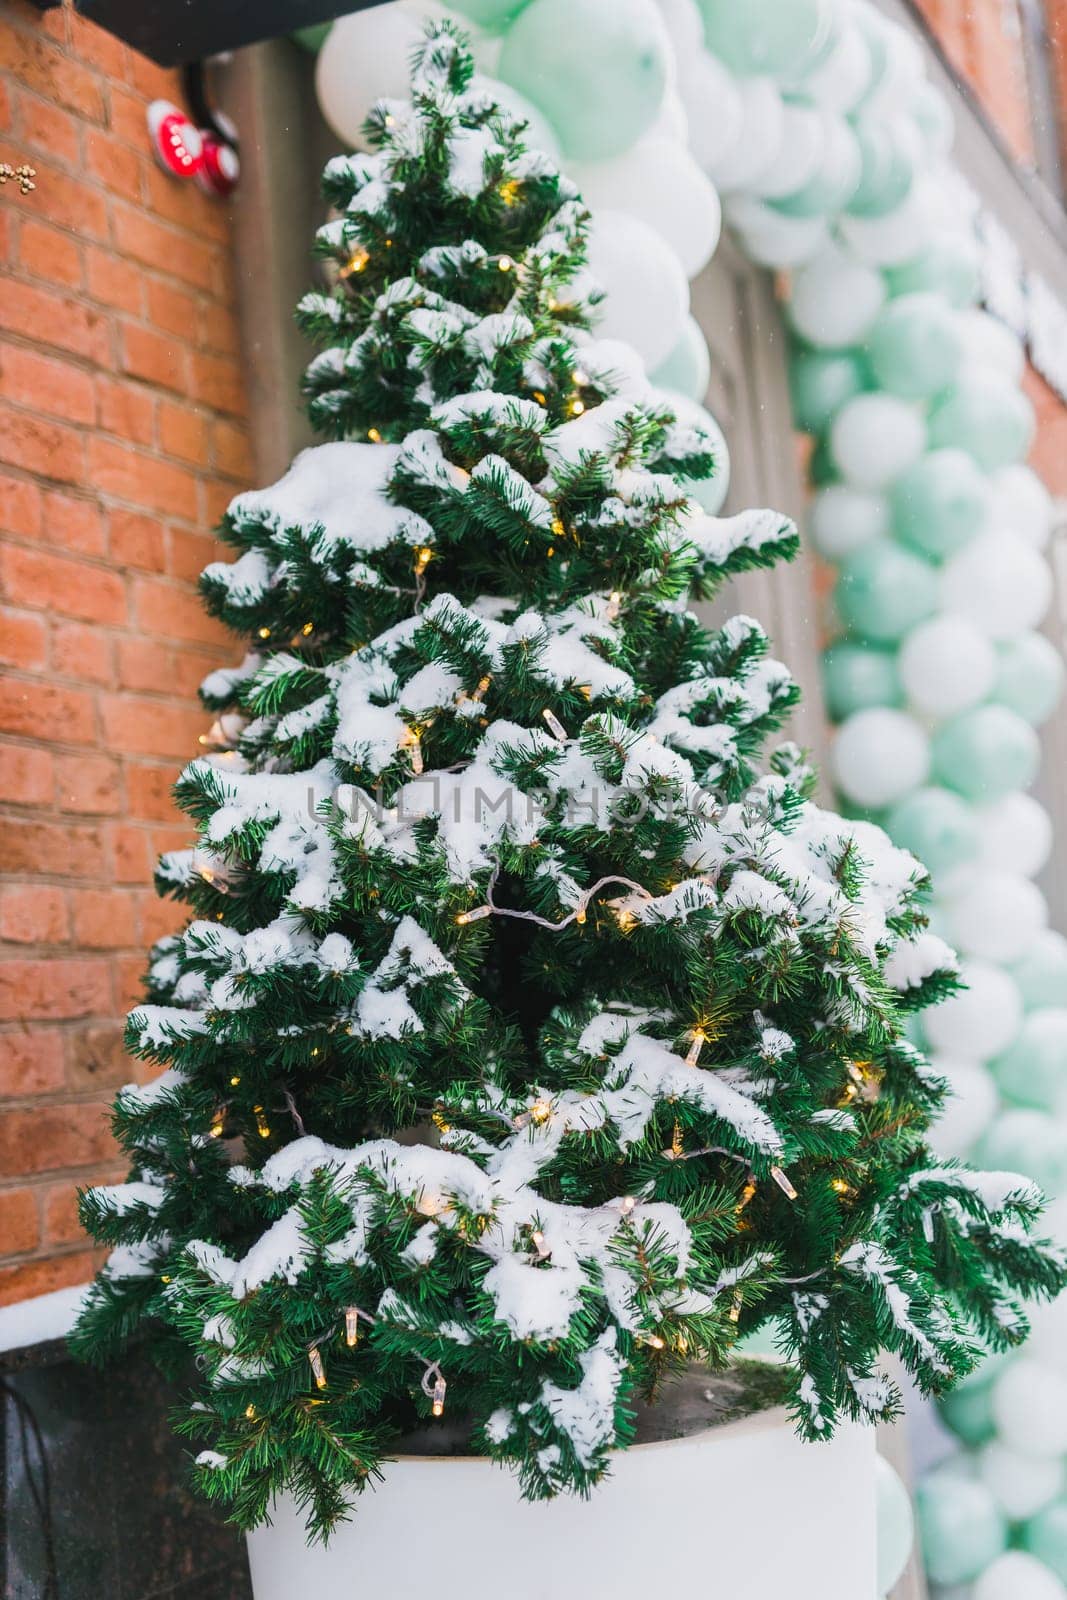 Decorated christmas tree outdoor in store window with snow. Winter holidays and decor xmas